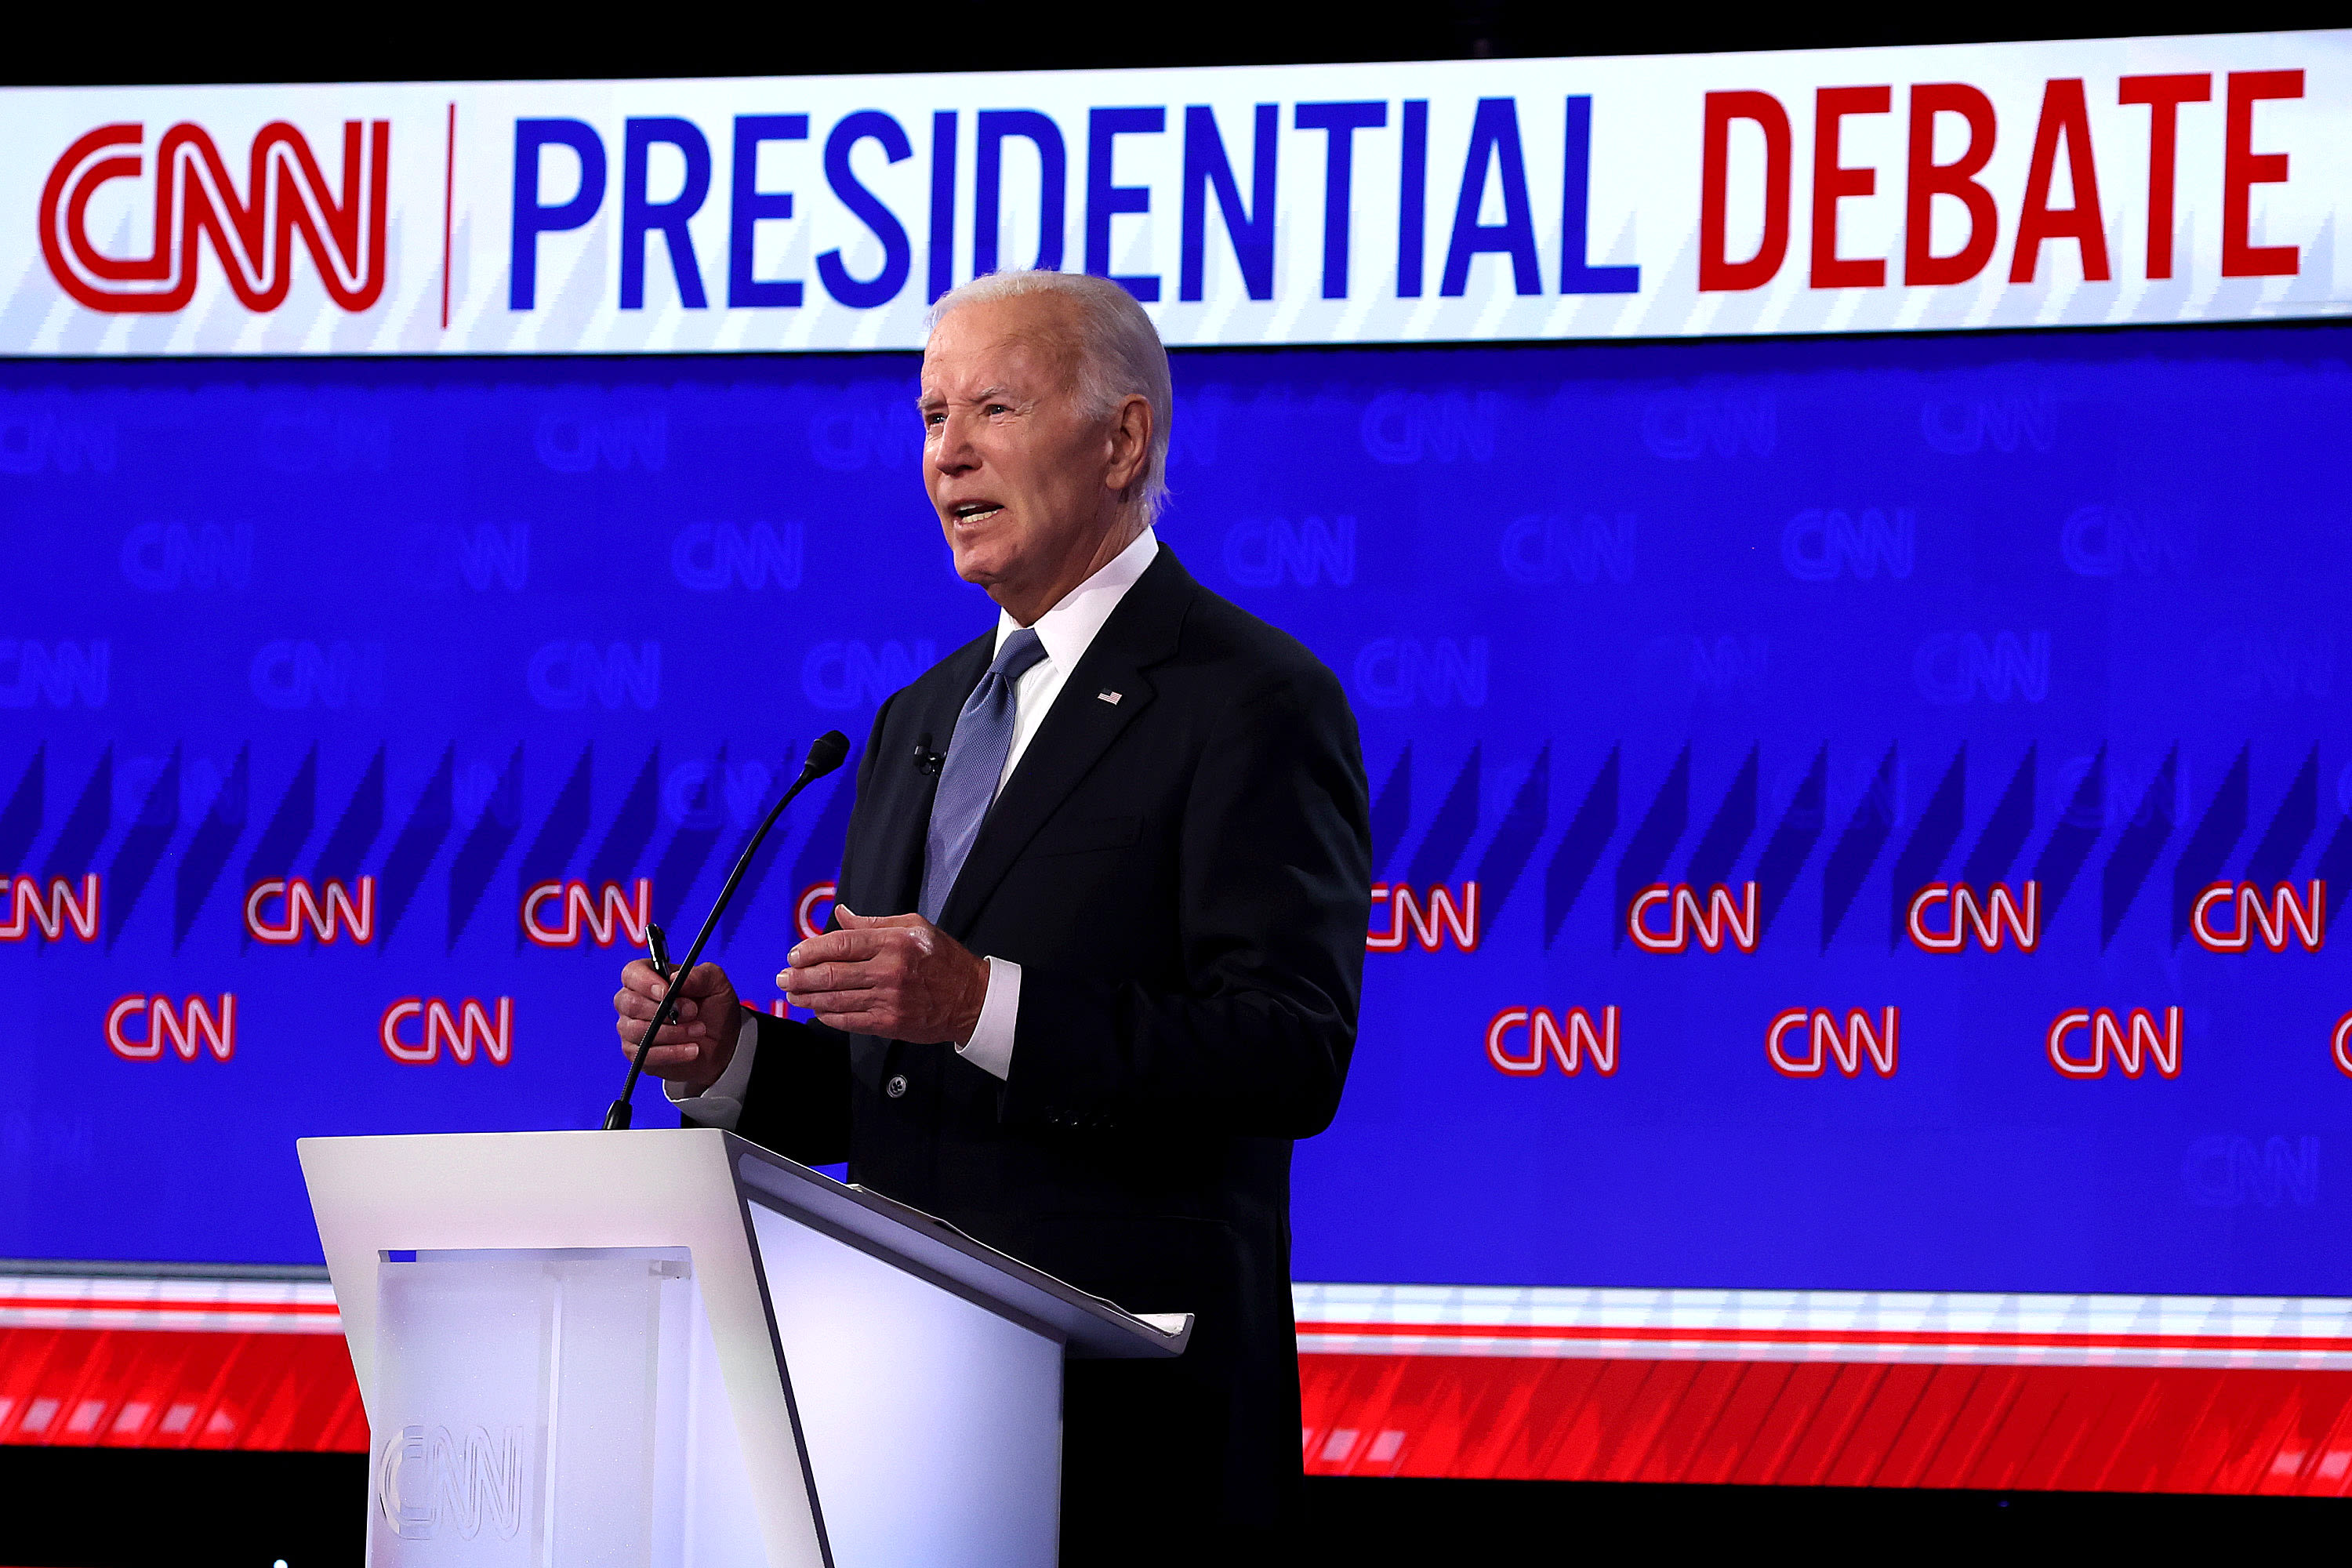 Hollywood’s Top Donors Freak Out After Biden’s Debate: ‘If He Doesn’t Drop Out, We’re Not Giving Any More Money...